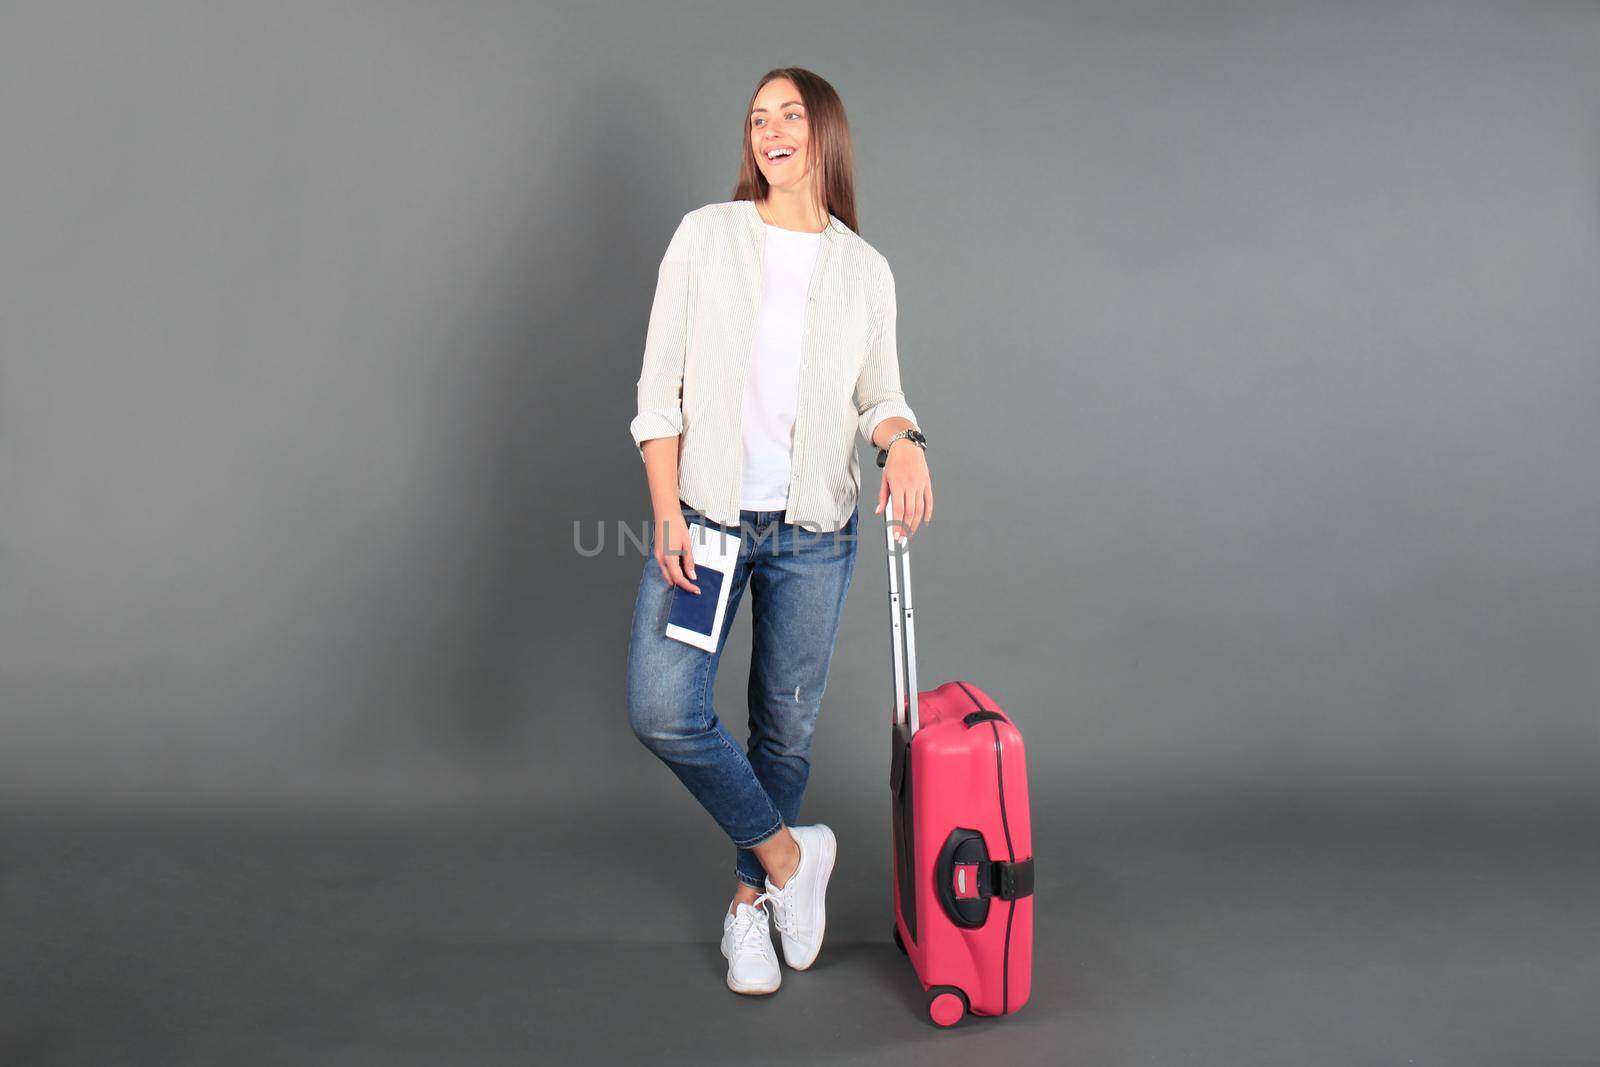 Young tourist girl in summer casual clothes, with sunglasses, red suitcase, passport, tickets isolated grey background.